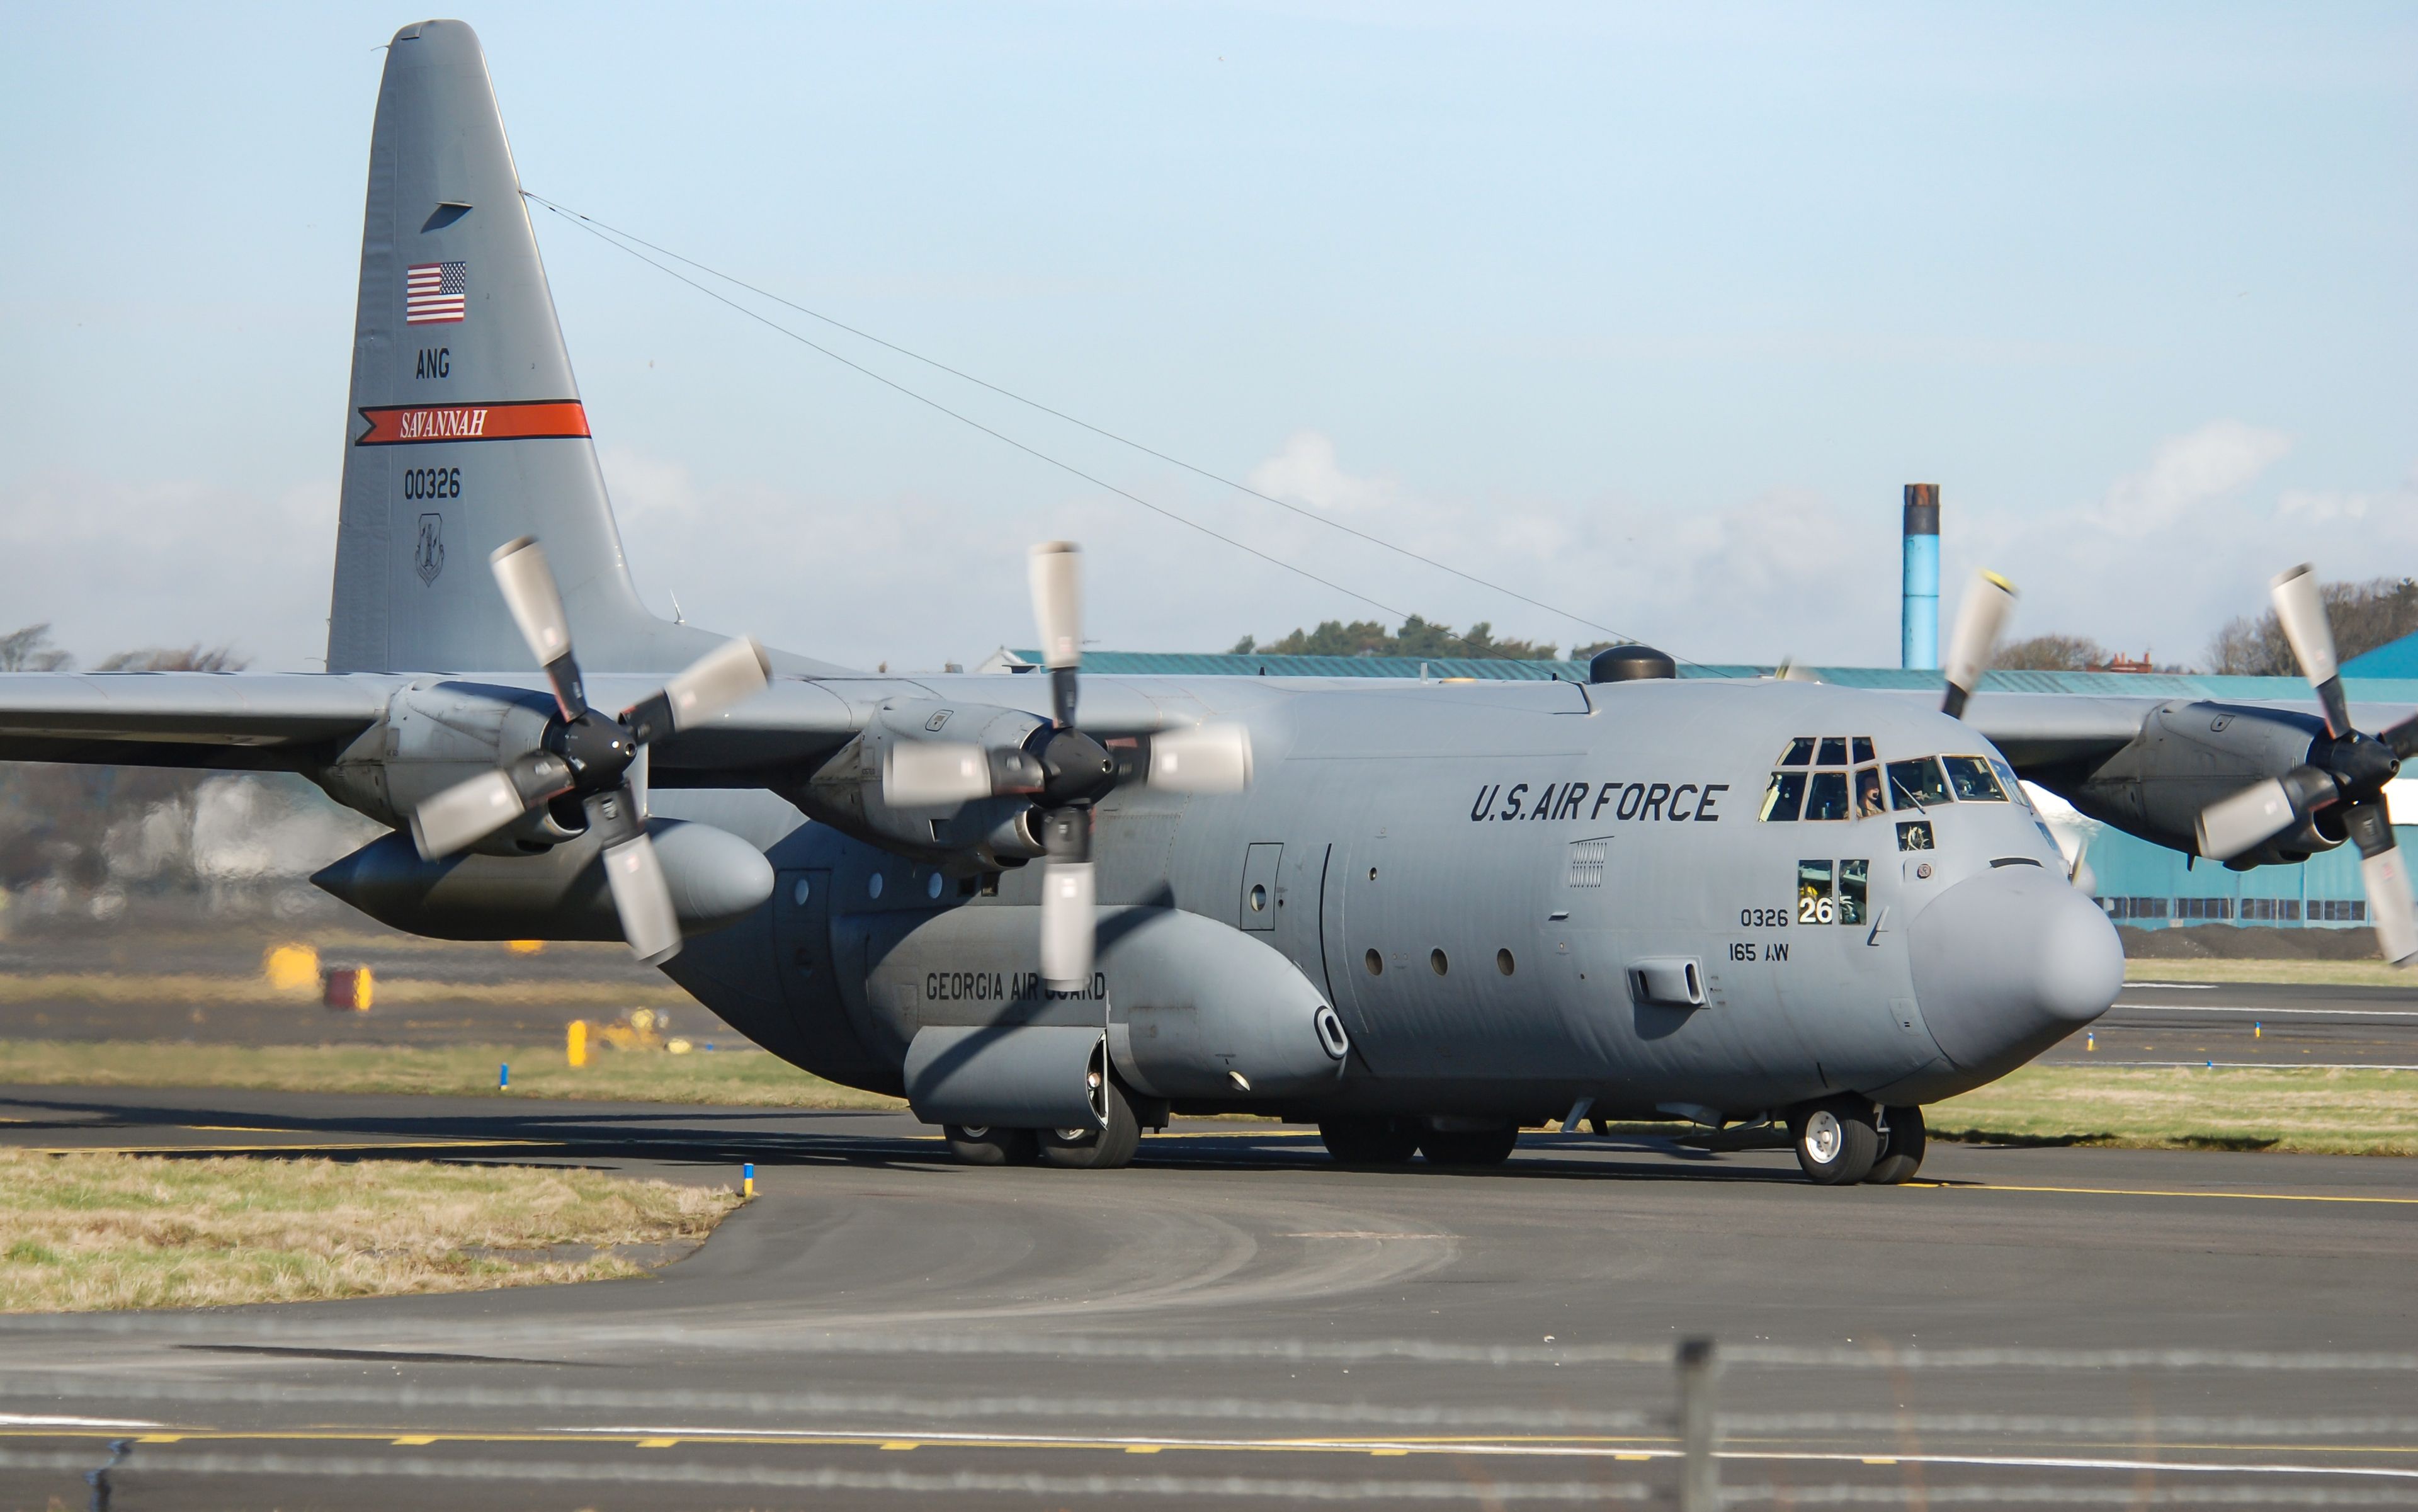 80-0326/800326 Withdrawn from use Lockheed C-130 Hercules Airframe Information - AVSpotters.com